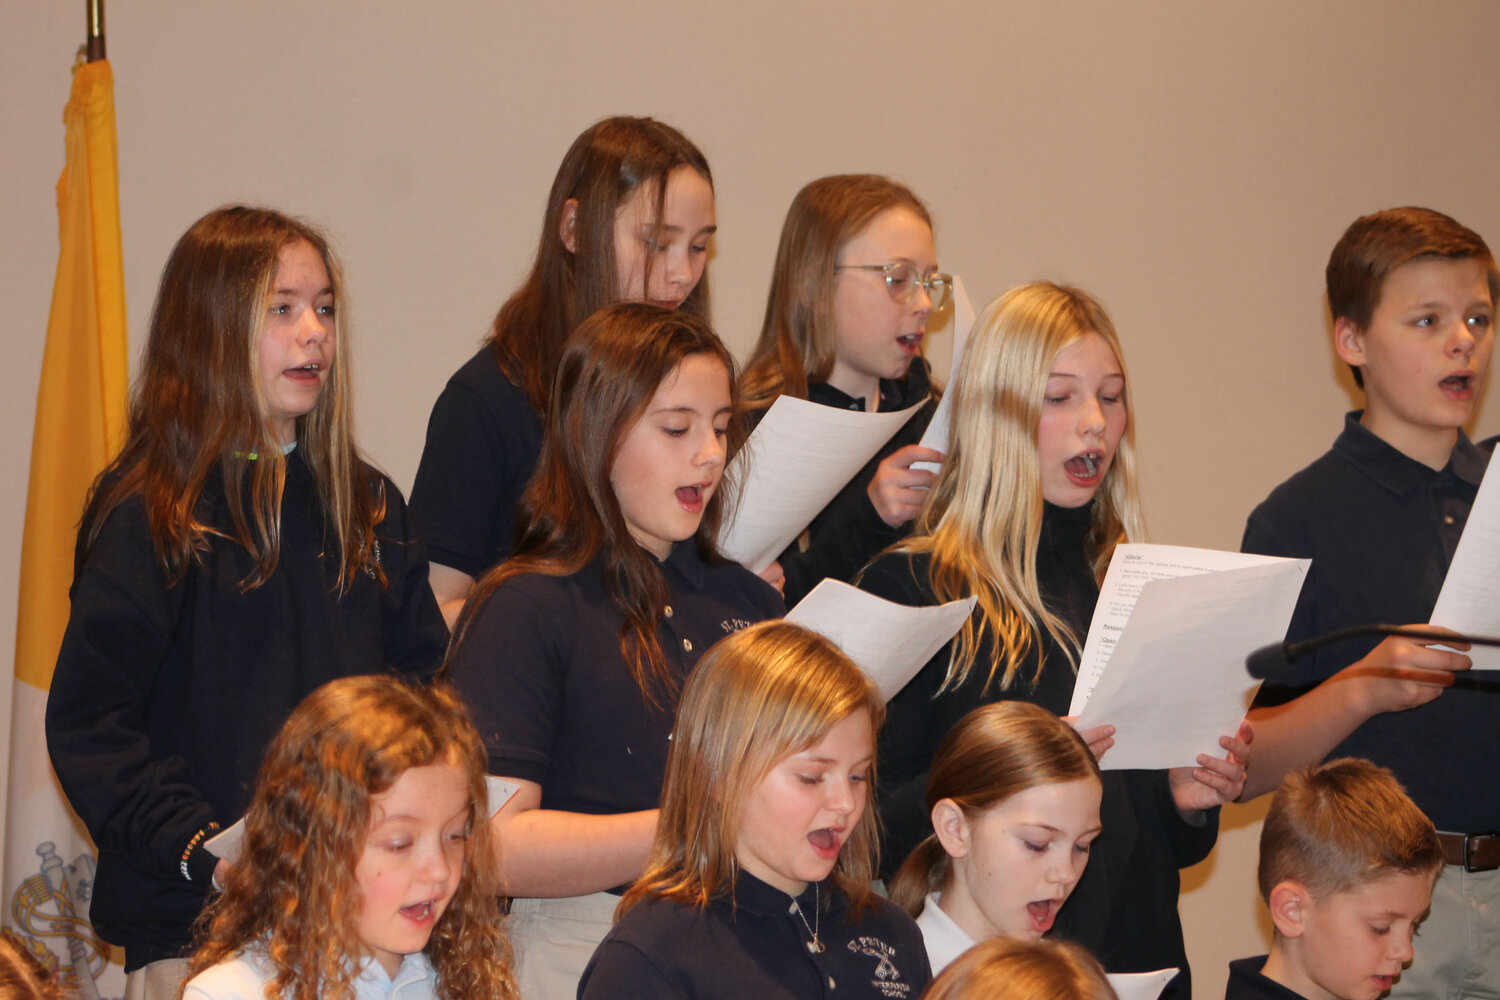 Members of the contemporary choir of St. Peter School in Jefferson City lead the singing at the Saturday evening Vigil Mass in St. Andrew Church in Holts Summit Jan. 27, as Catholic Schools Week got under way. This year’s theme is “Catholic Schools: United in Faith and Community.”